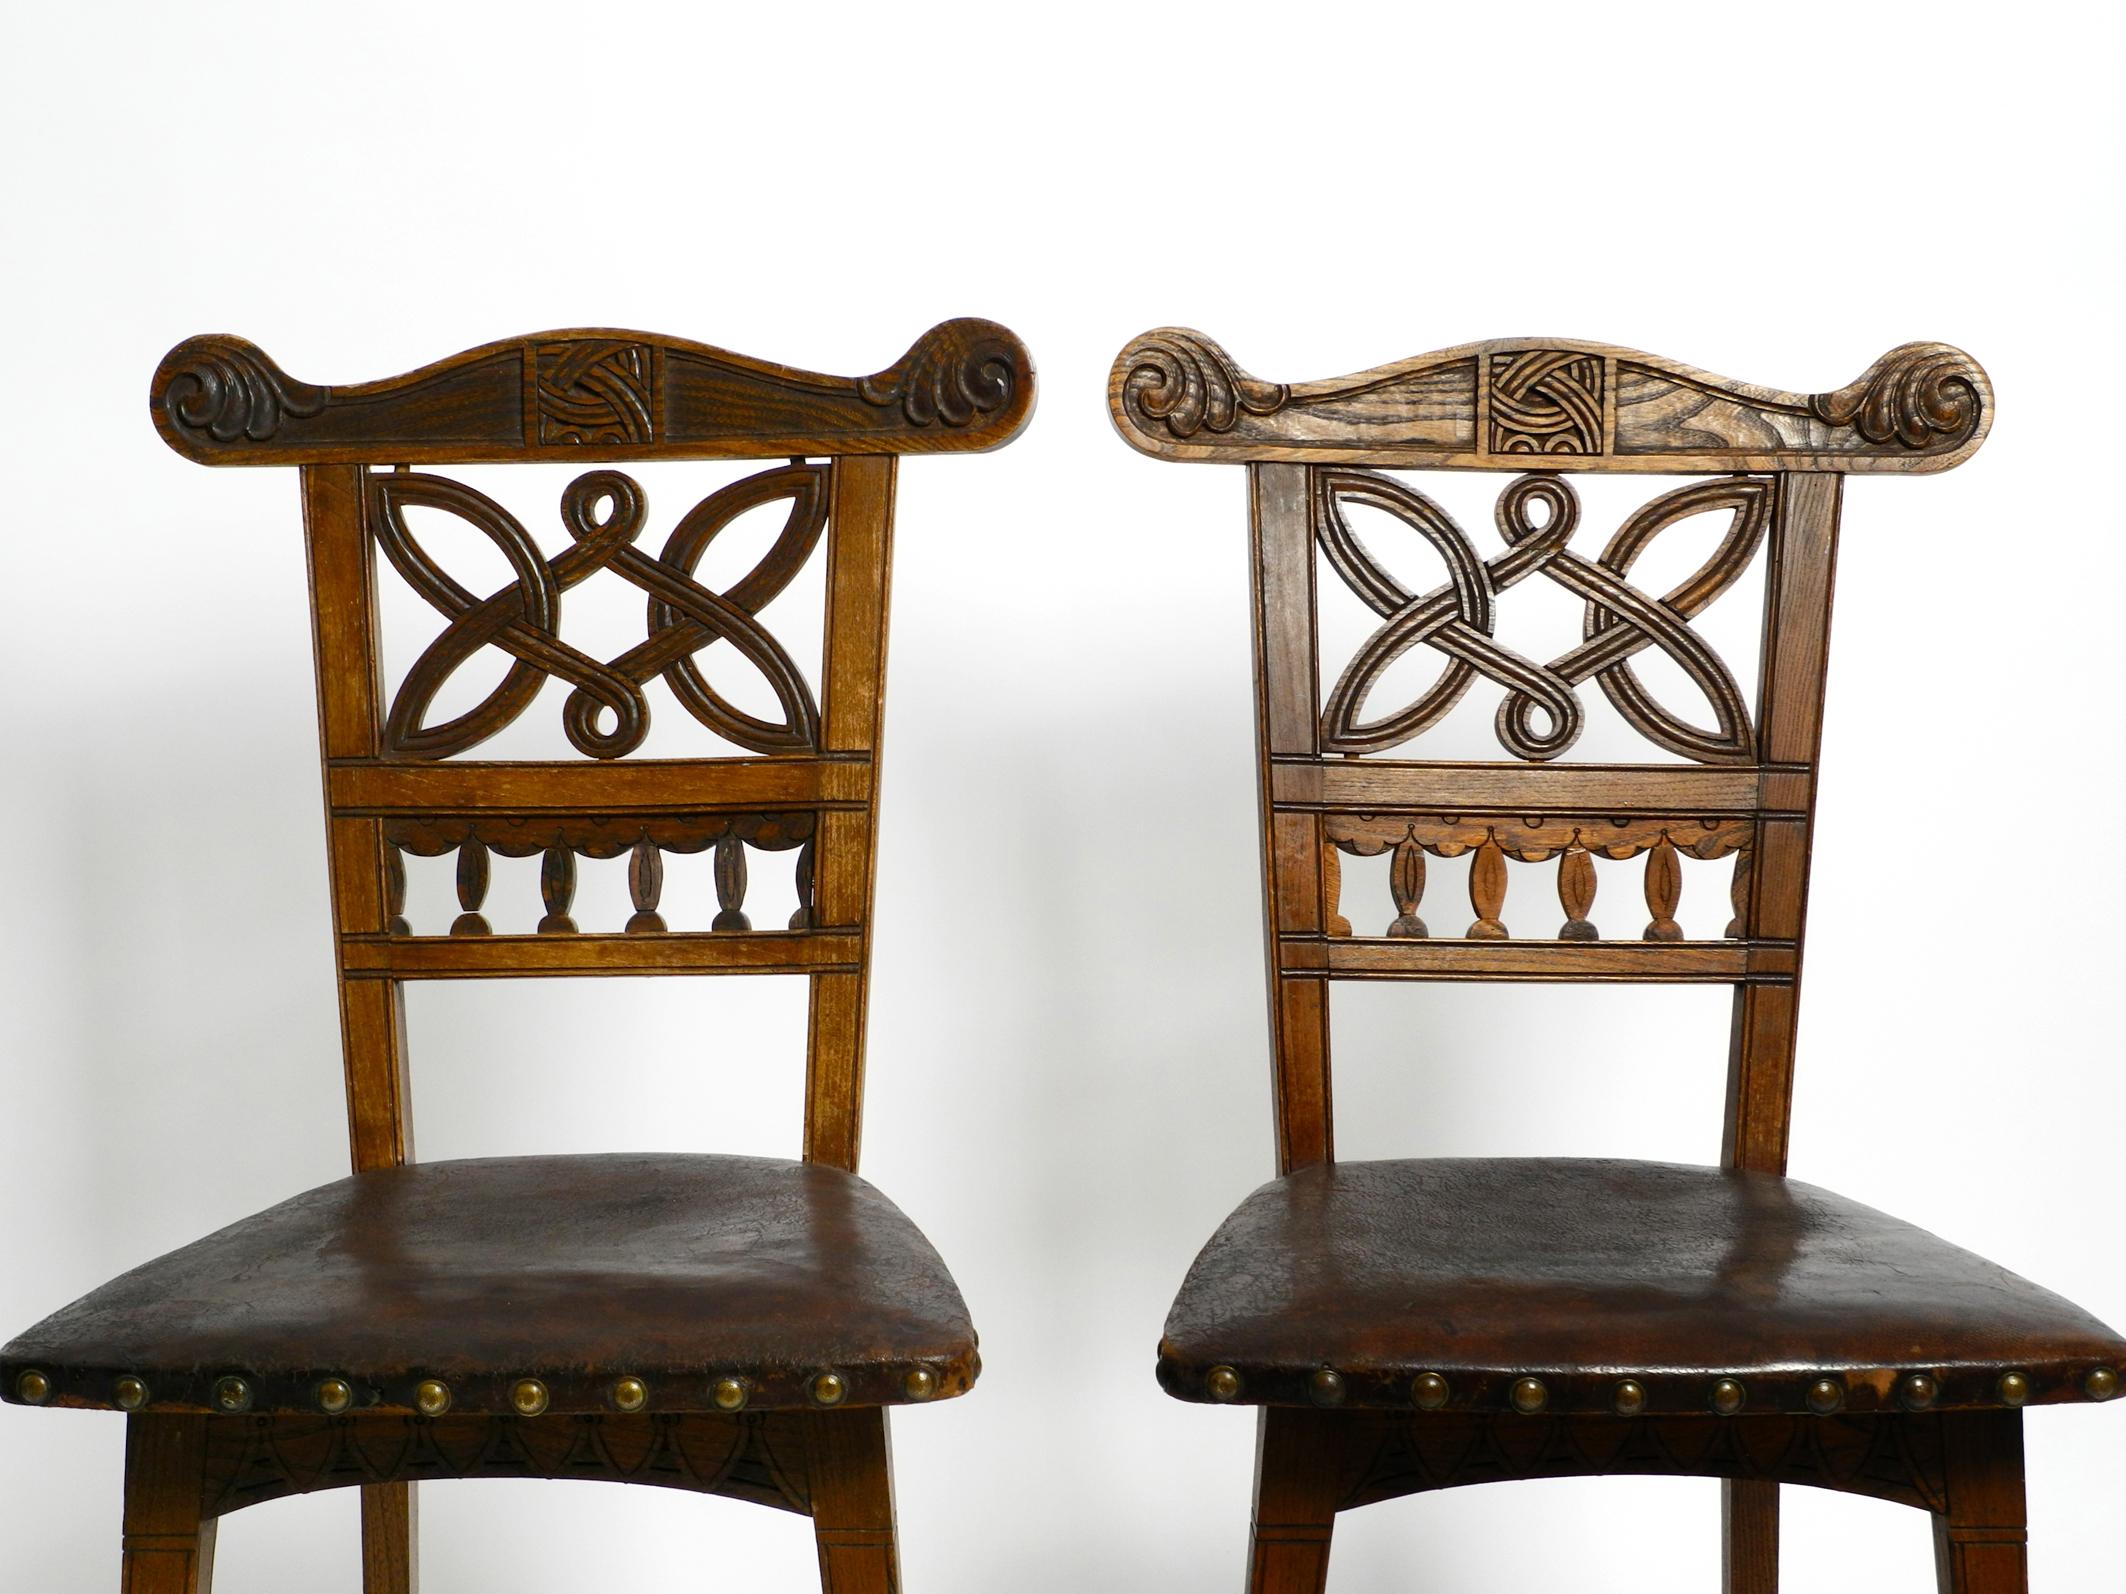 2 Art Nouveau Oak Chairs Still with the Original Leather Seats from Around 1900 For Sale 9